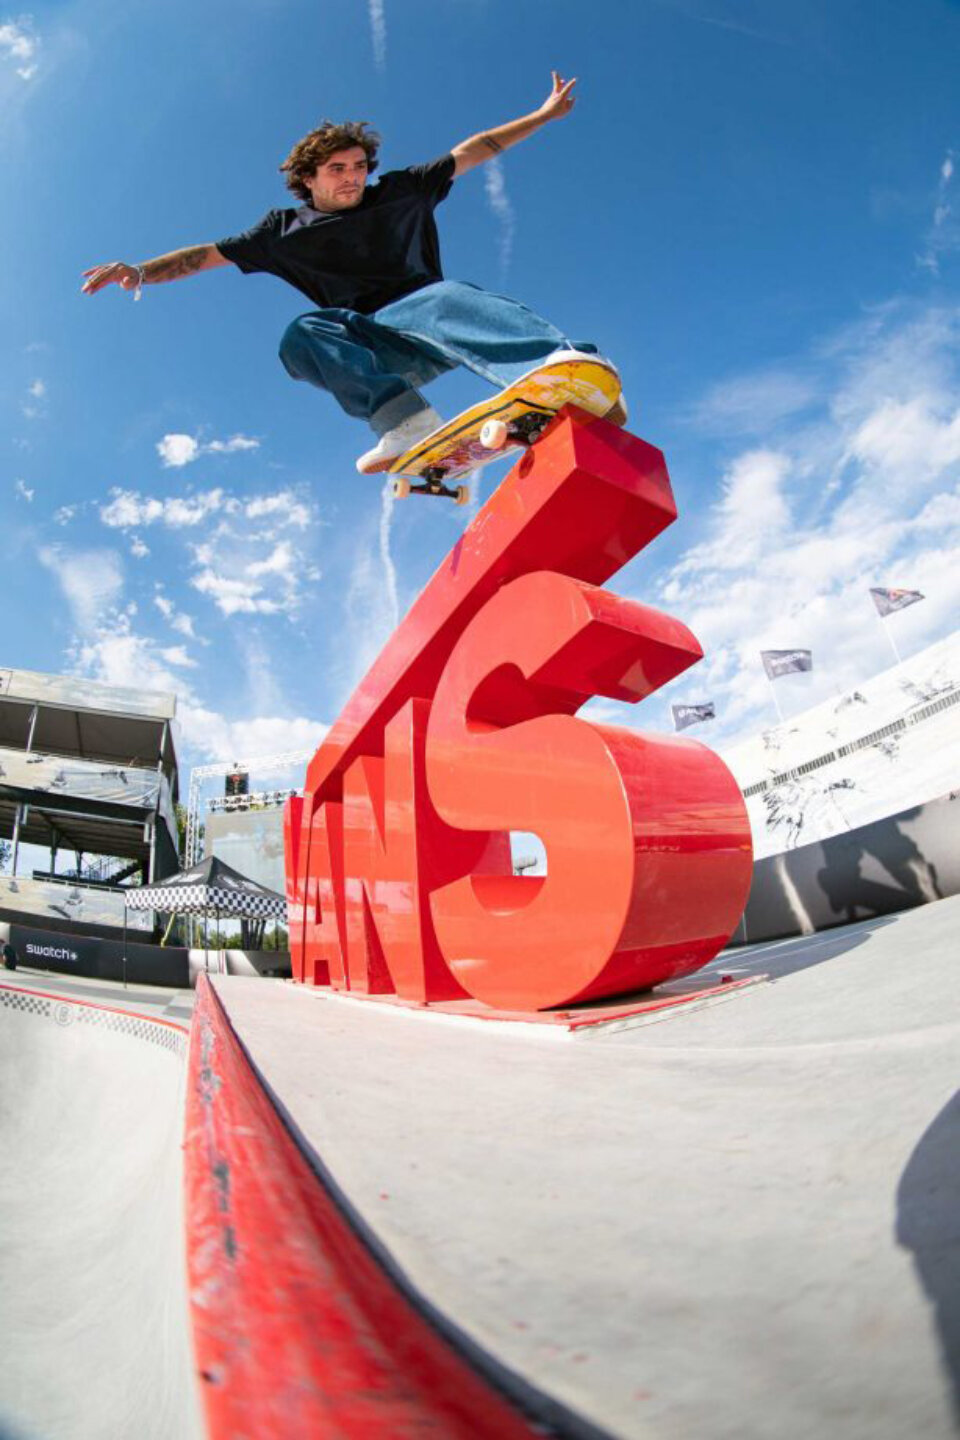 My suggestion for 2020 is that Vans fabricates objects that also act as captions. For instance, if this “Vans” obstacle said something like, “Pedro Barros nosegrind,” then I wouldn’t be sitting here at three in the morning trying to come up with something clever to write.  Photo: Anthony Acosta</span>